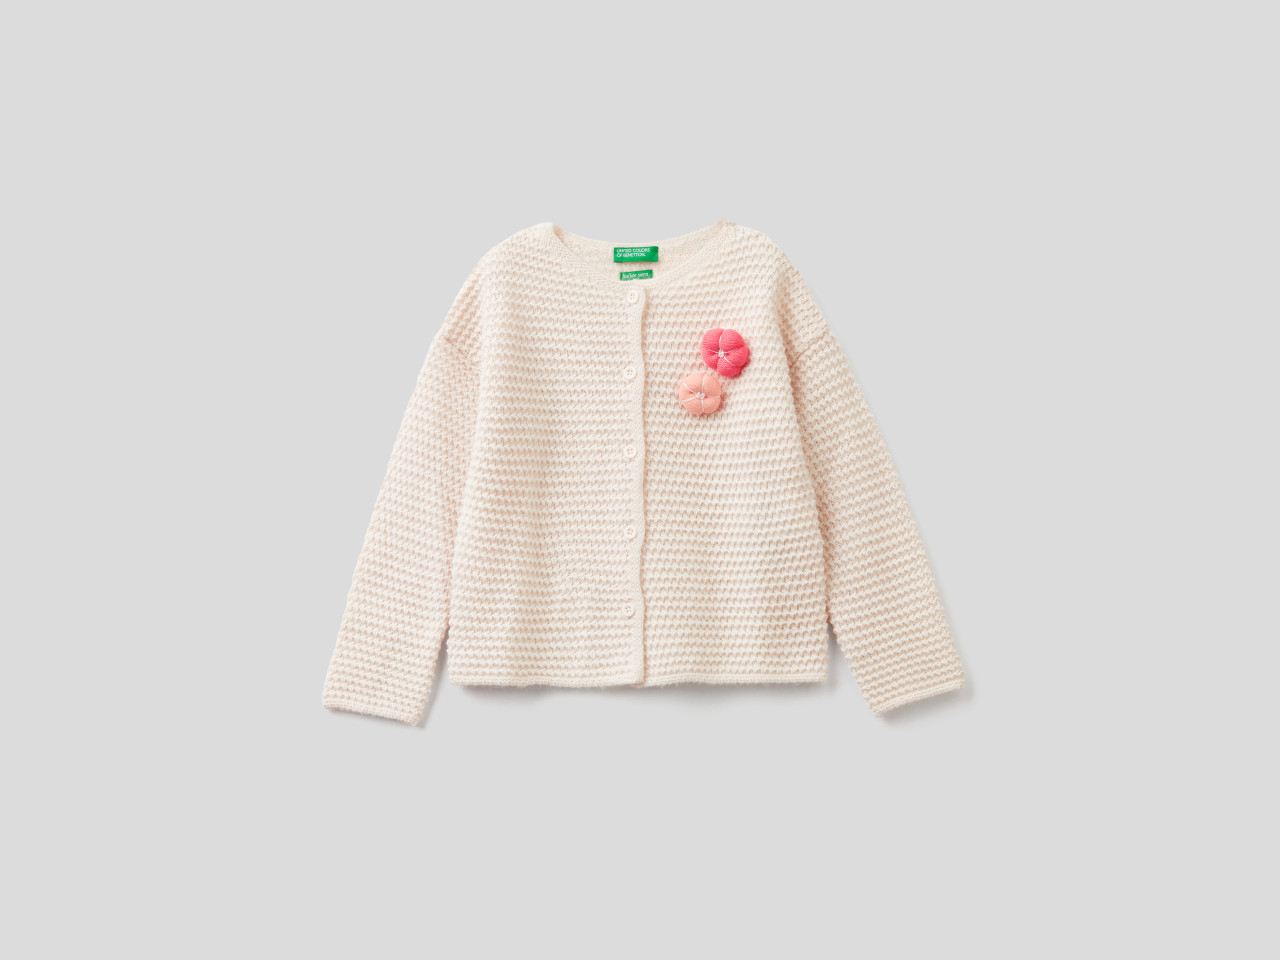 cardigan with buttons merino wool jacket knitted kids jacket Kleding Unisex kinderkleding Sweaters cable knitted cardigan toddler knits hanmade Girl's cardigan 